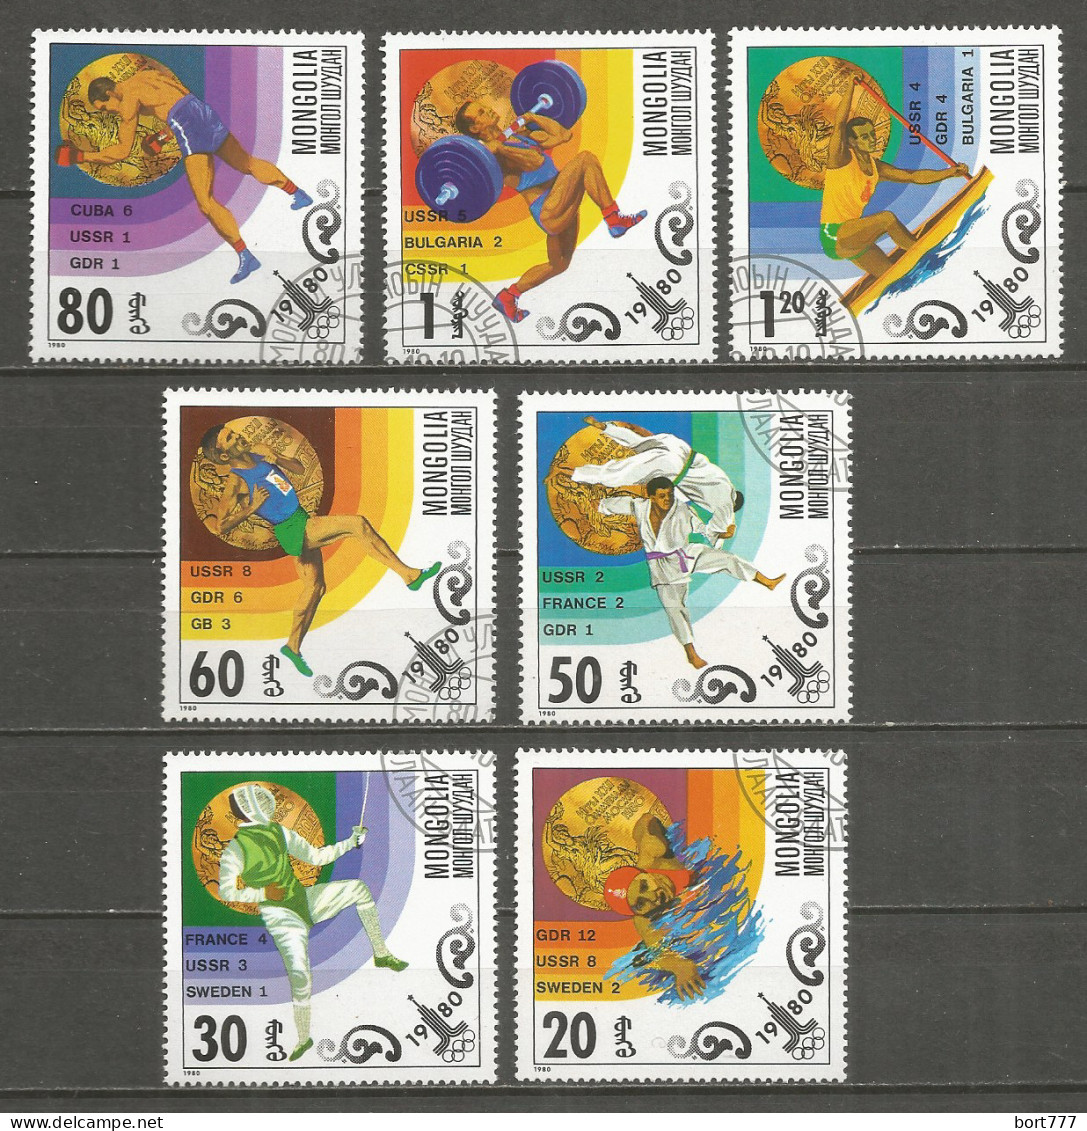 Mongolia 1980 Used Stamps CTO Sport Olympic Games - Mongolia